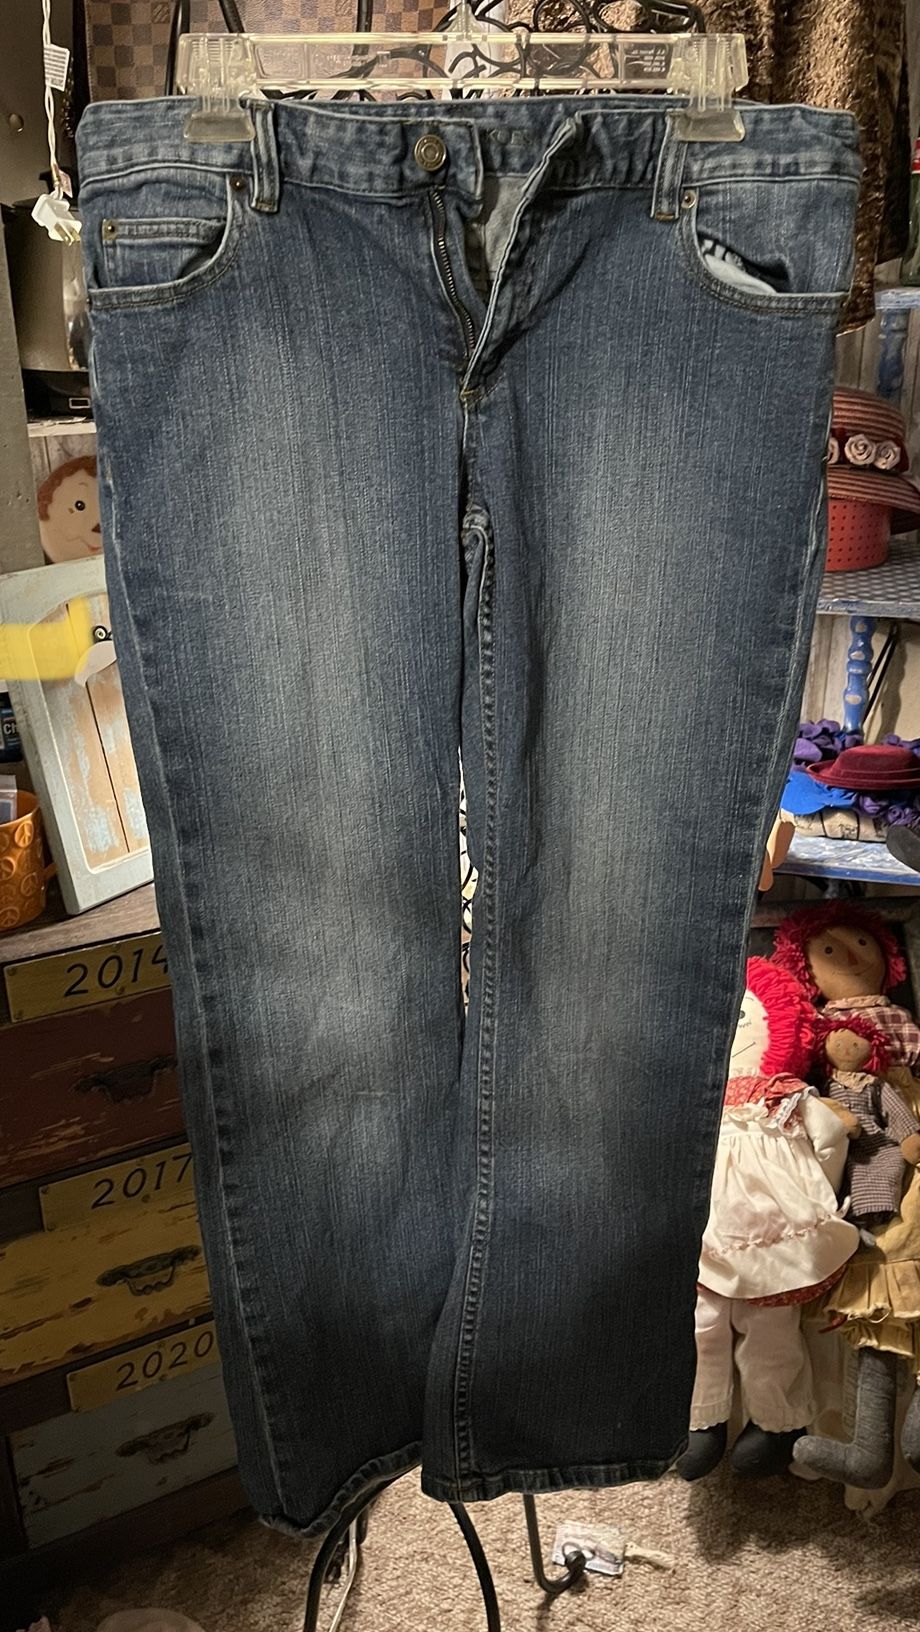 Michael Kors Womens Jeans in Like condition. Classic 5 pockets. Cotton Spandex Size 12